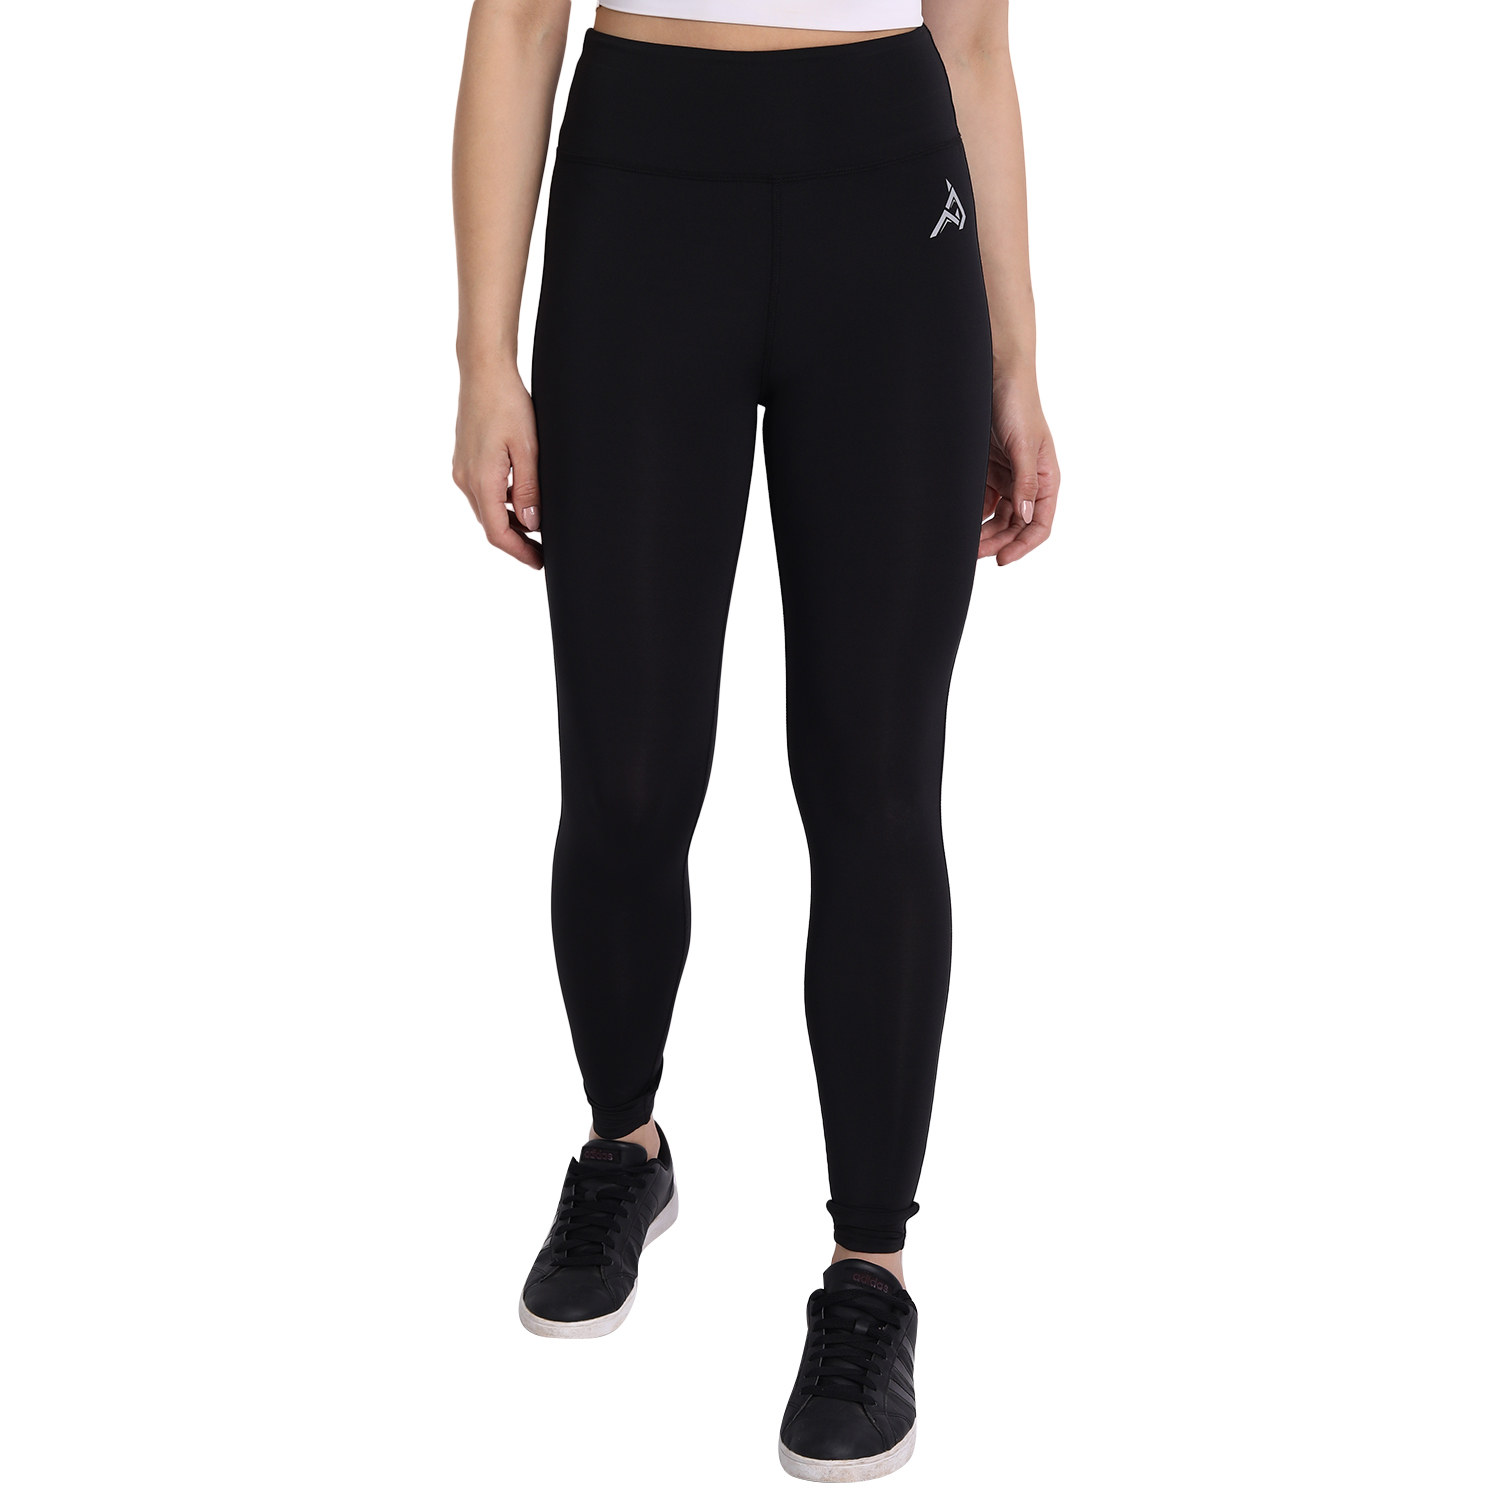 Ideology Womens Black Cropped Colorblock Athletic Leggings XL BHFO 1925 for  sale online